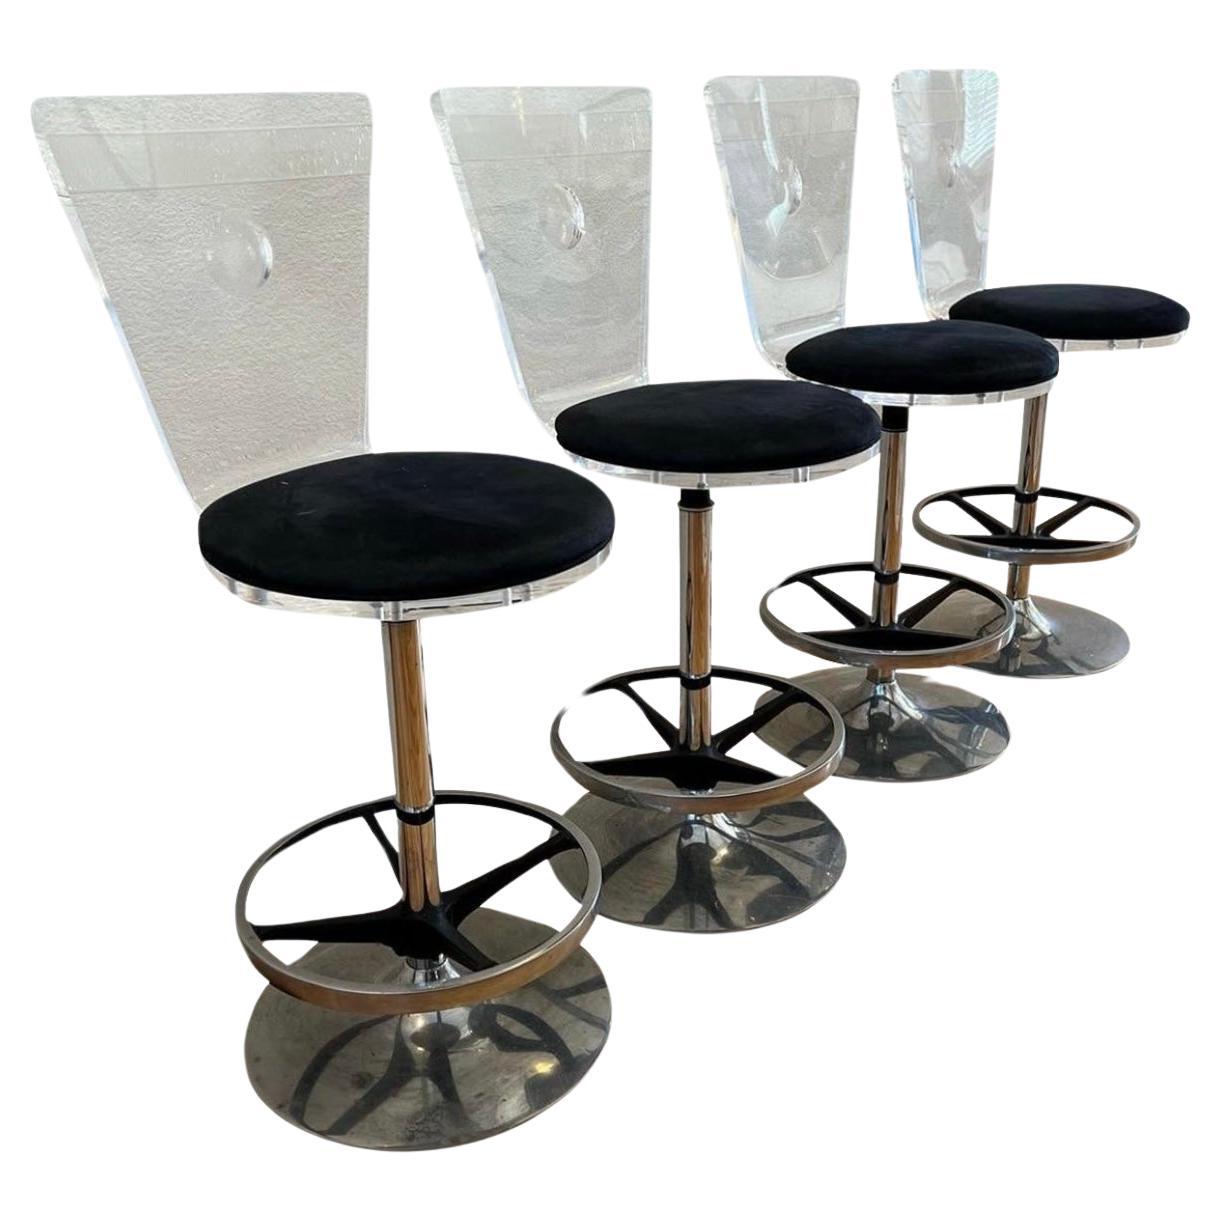 1980 Vintage Lucite and Chrome Swivel Counter Stools, Set of 4 chairs en vente